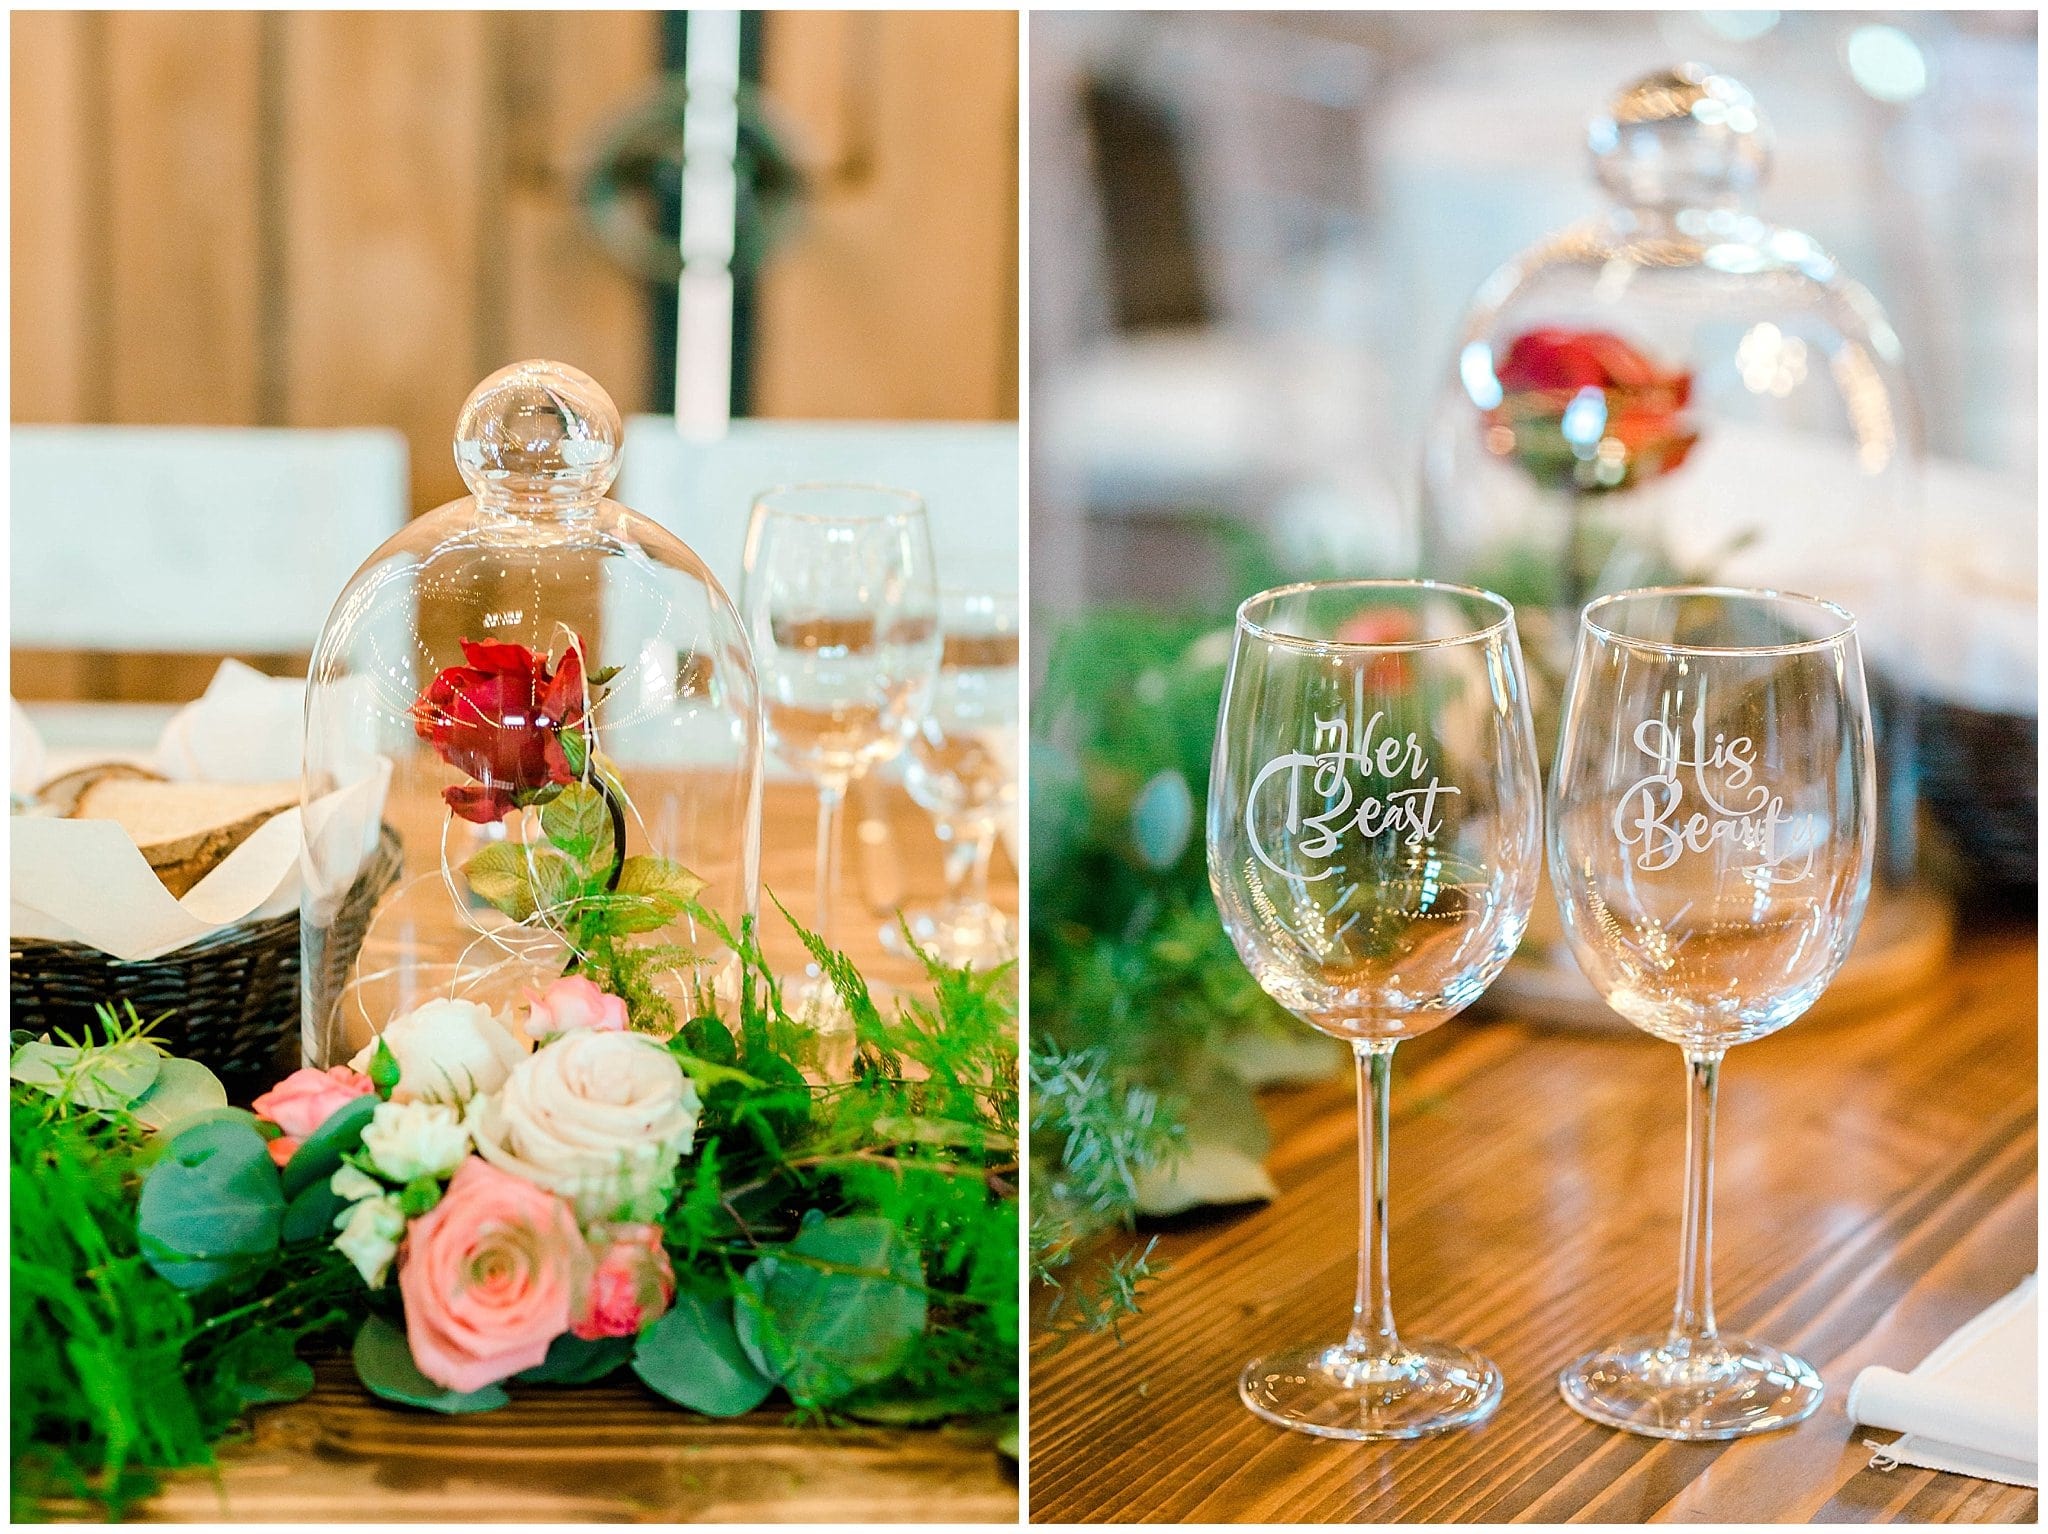 Windmill Winery Barn Table Scape Set Up, Beauty and the Beast Theme